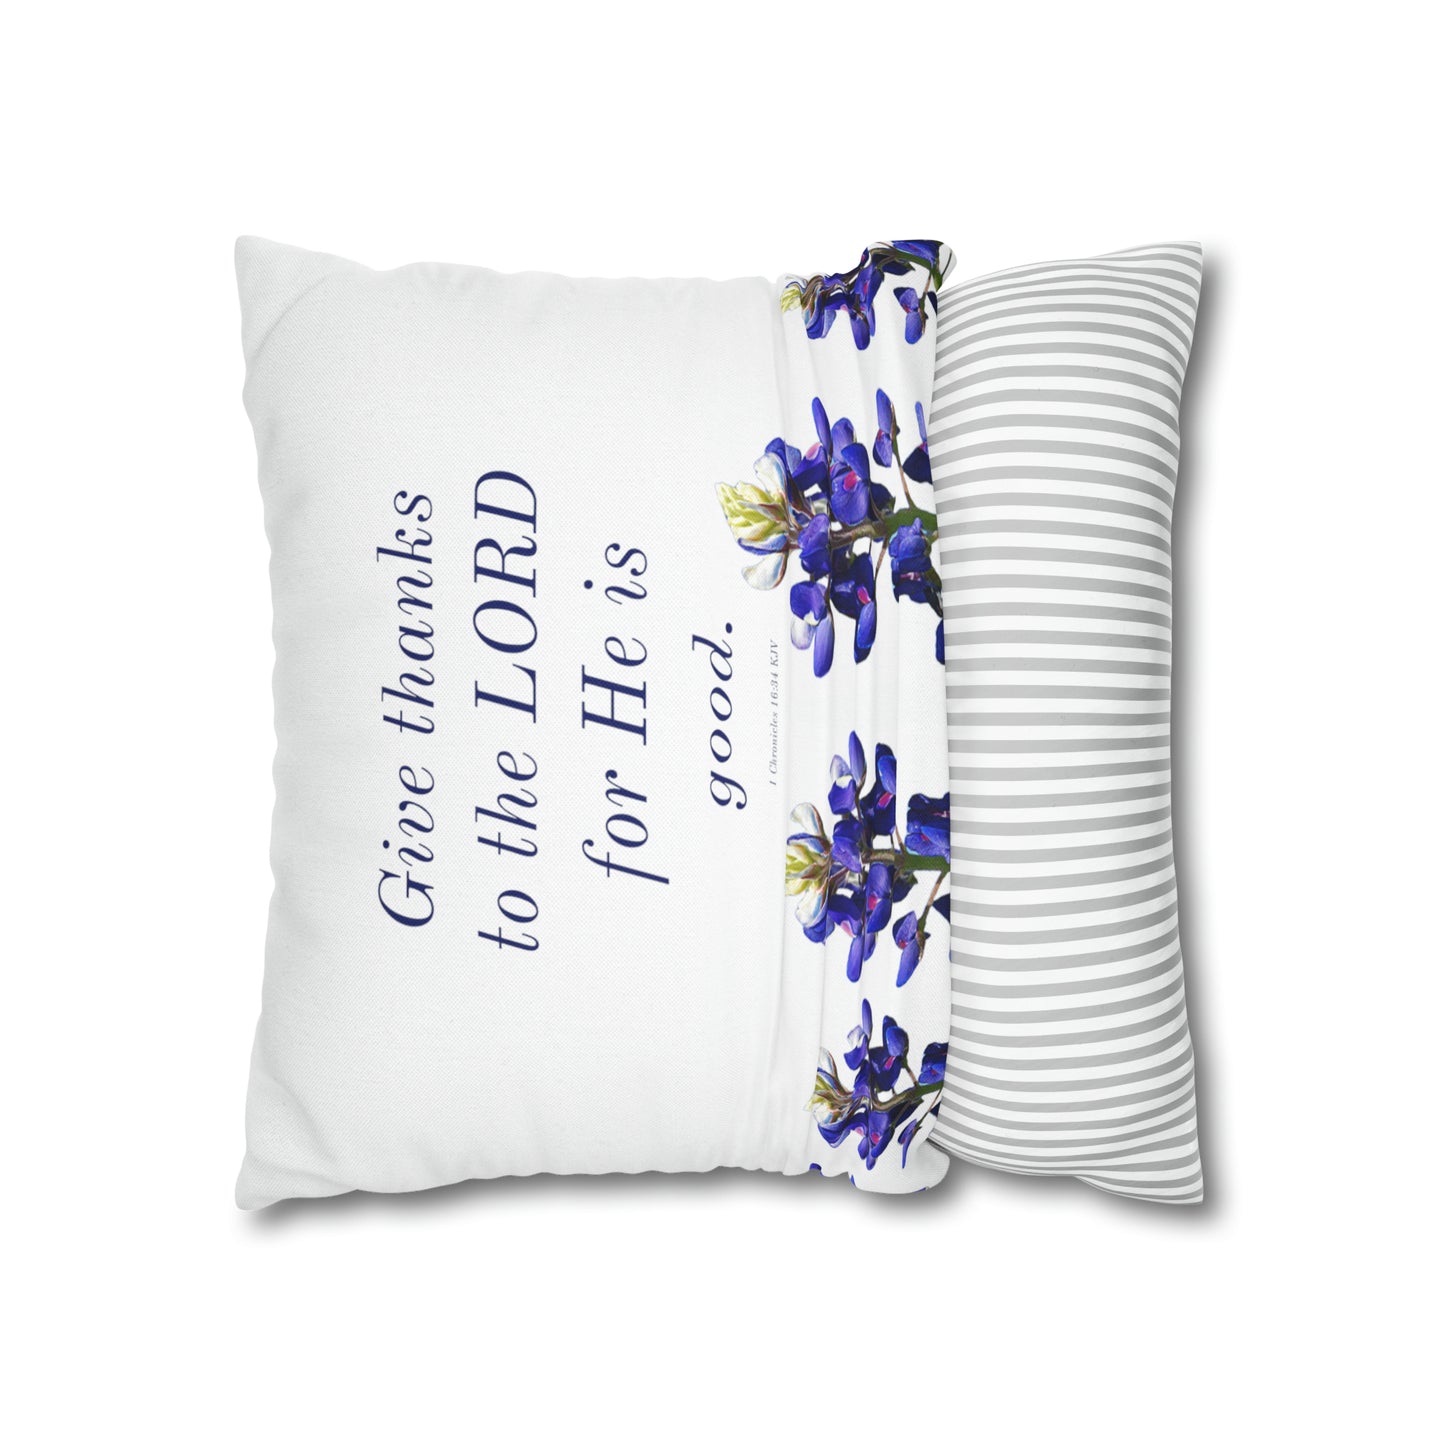 Spun Polyester Square Pillowcase - Give Thanks to the LORD - Bluebonnets